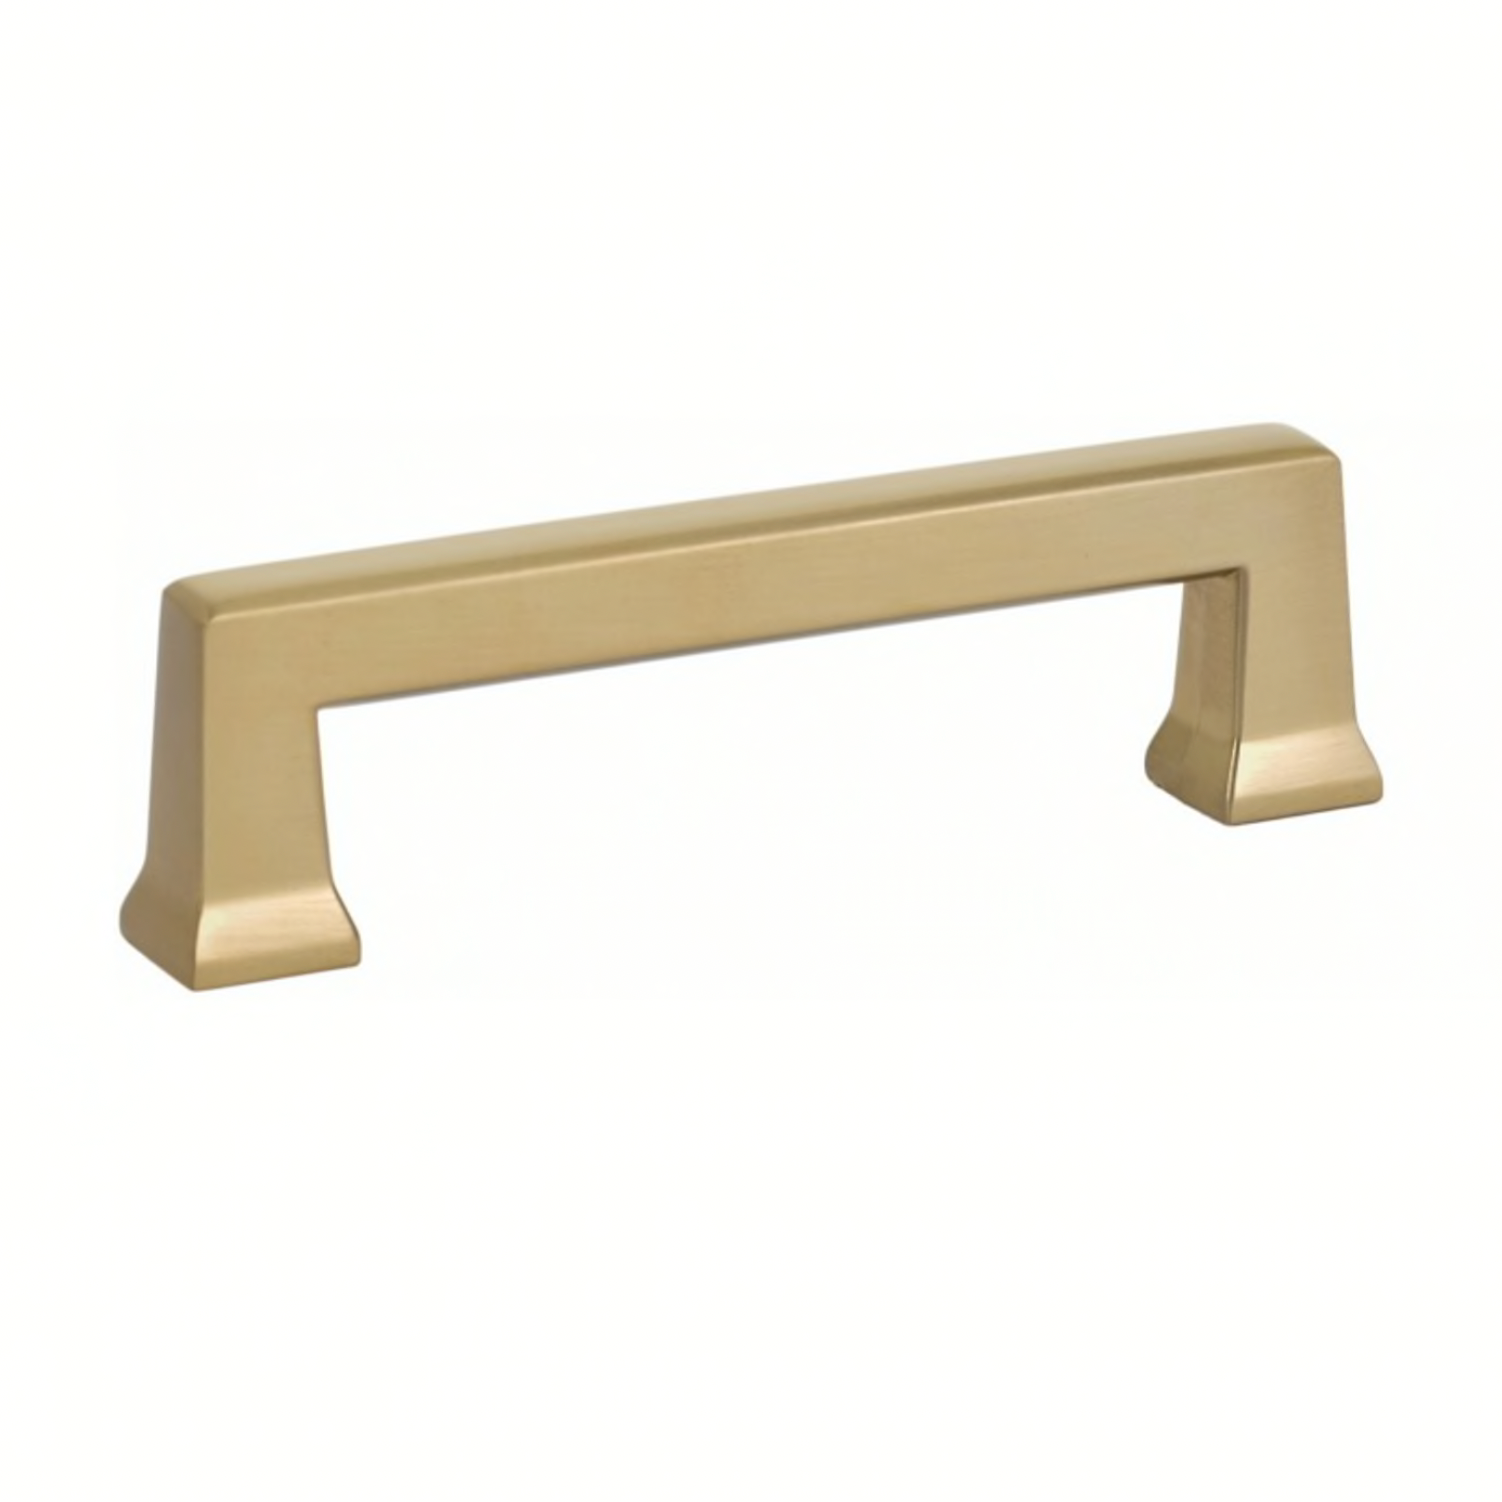 Champagne Bronze "Deco" Cabinet Knobs and Drawer Pulls - Industry Hardware